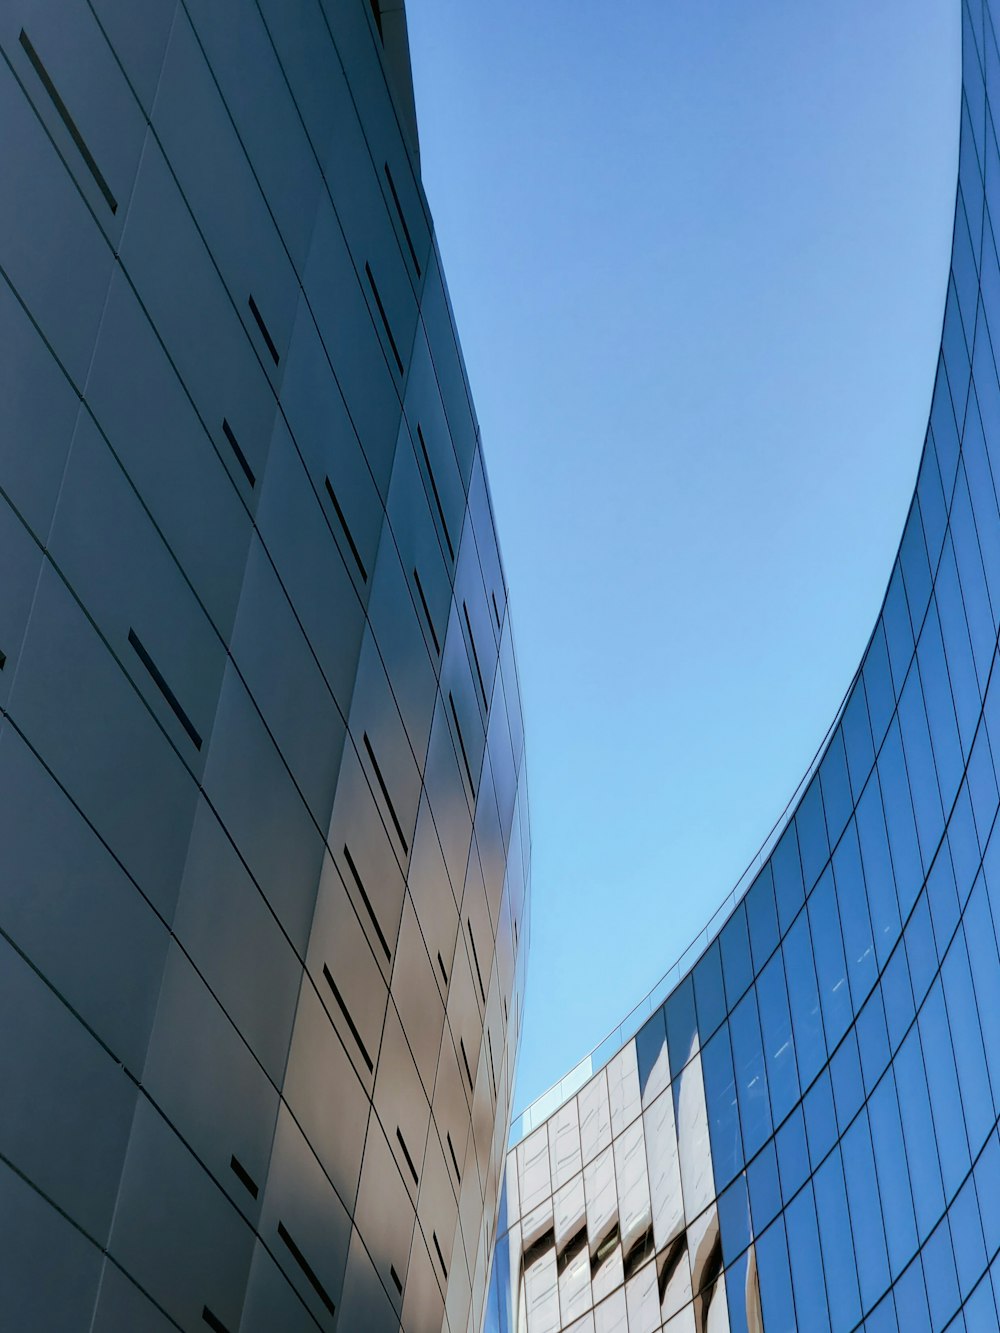 low-angle photography of blue glass walled building during daytime